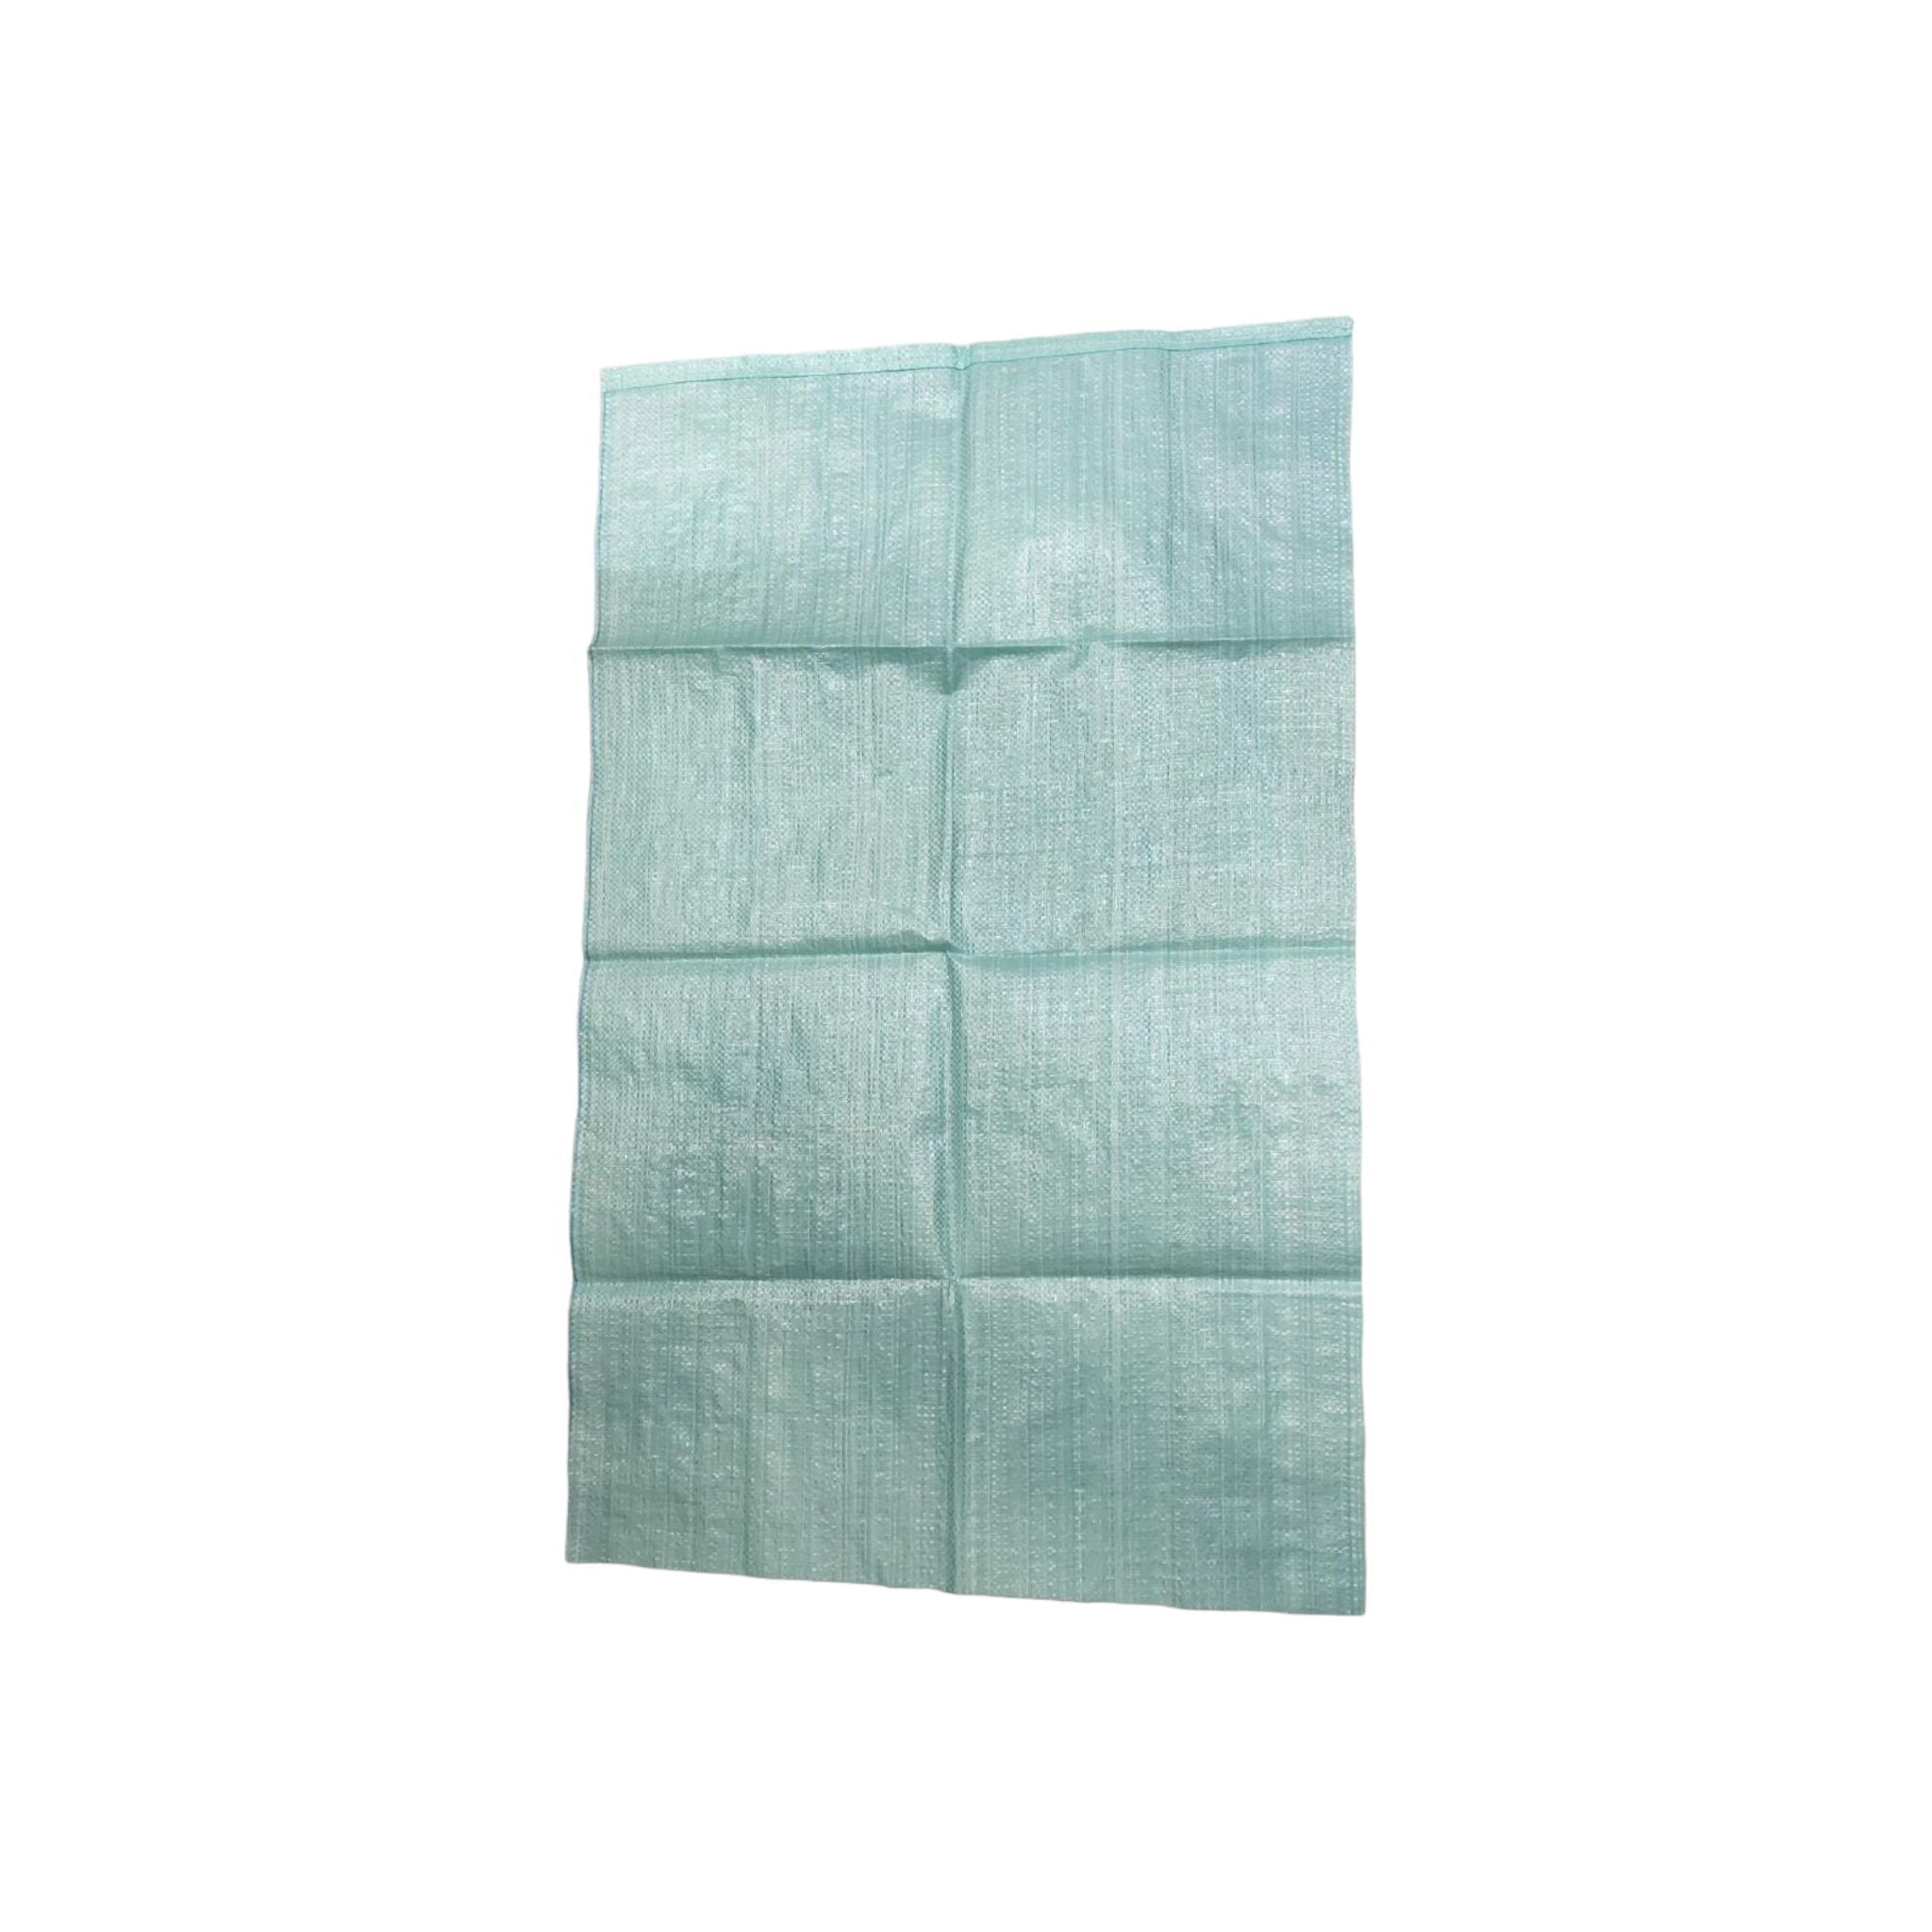 Garden Waste Refuse Bags Woven PP  66x105cm 5pack